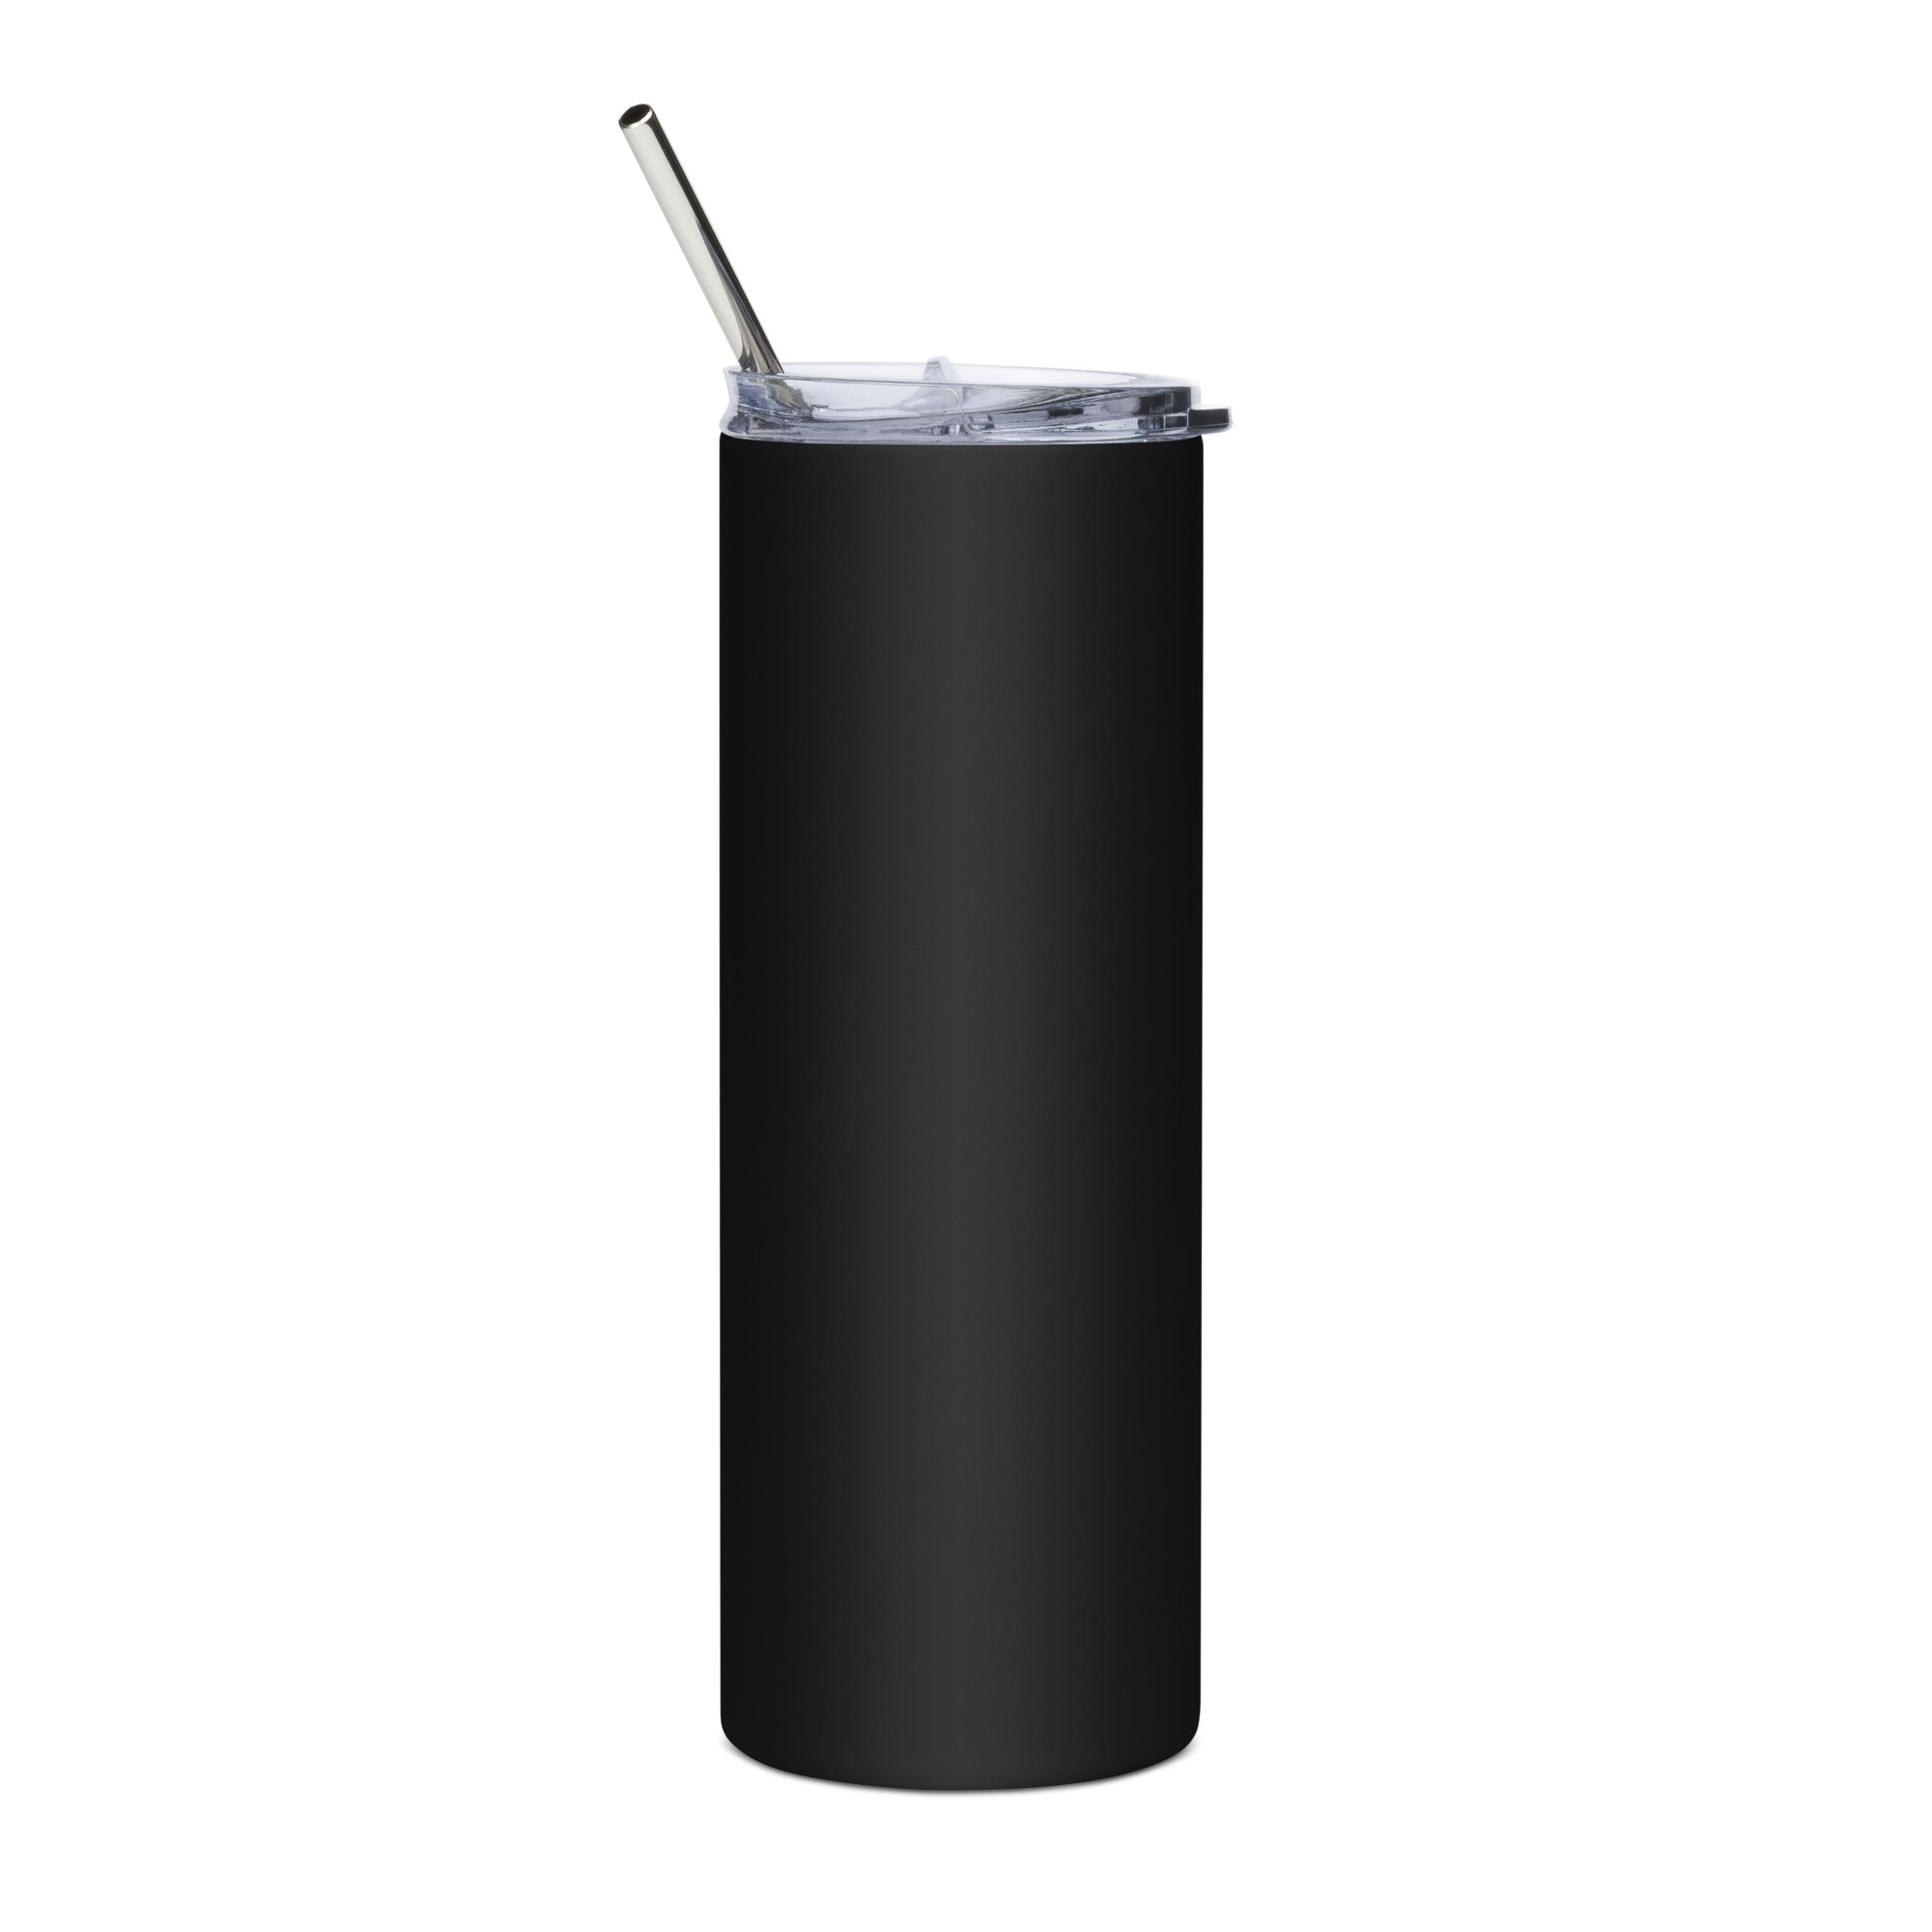 80s on 8: Stainless Tumbler